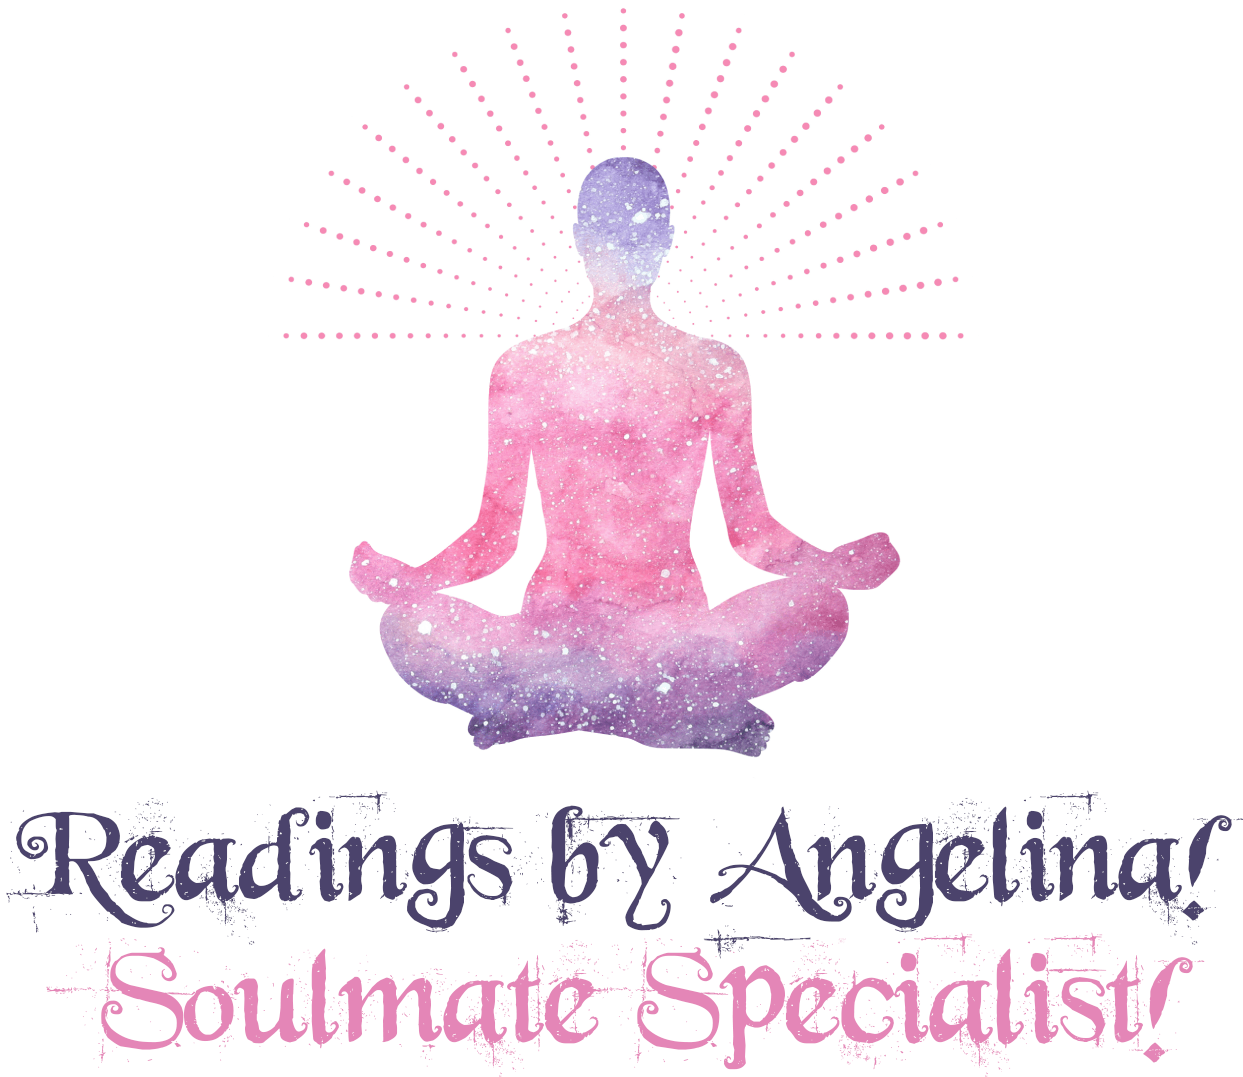 Readings by Angelina! Soulmate Specialist!